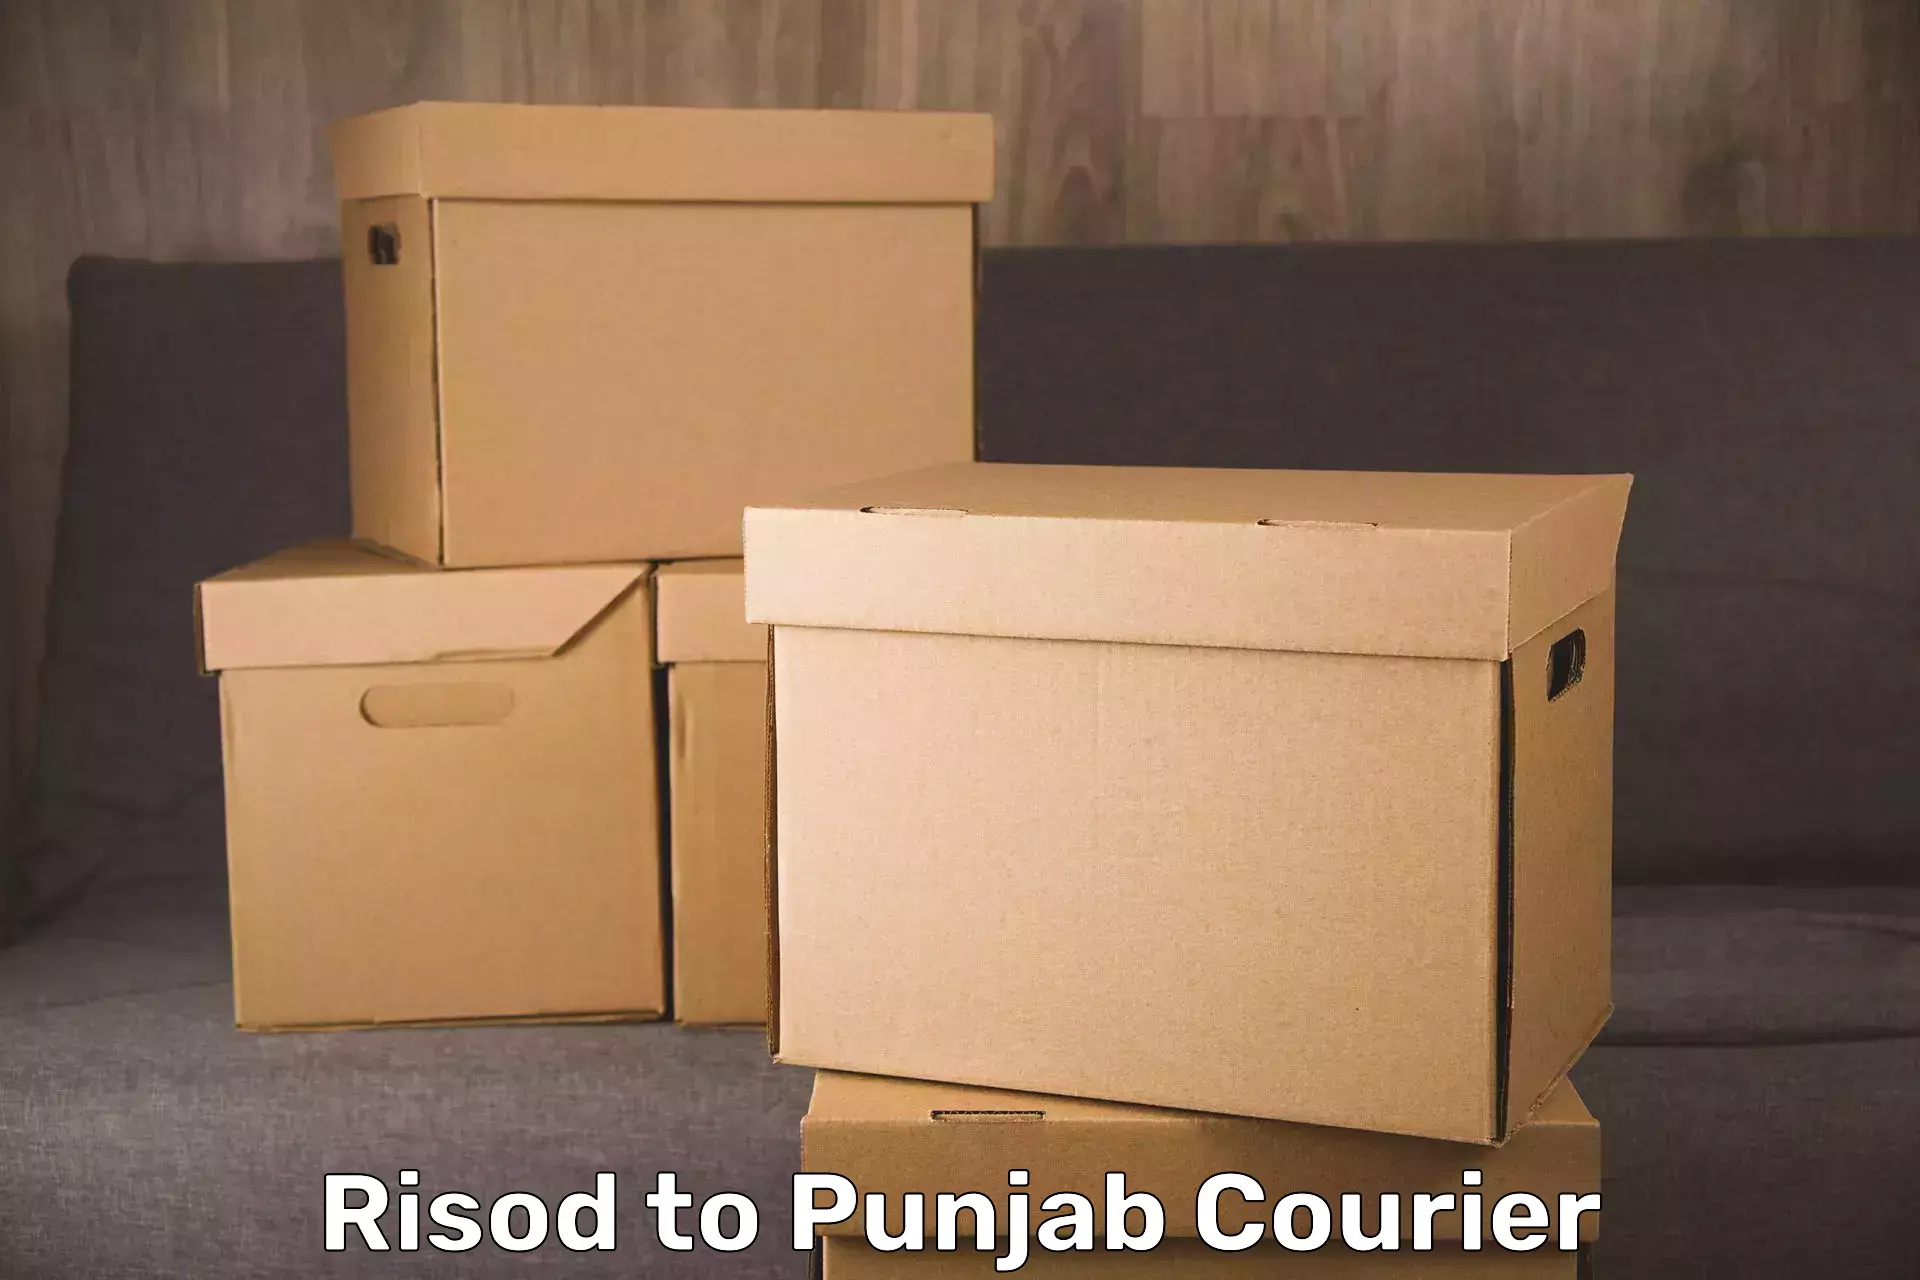 Airport luggage delivery Risod to Punjab